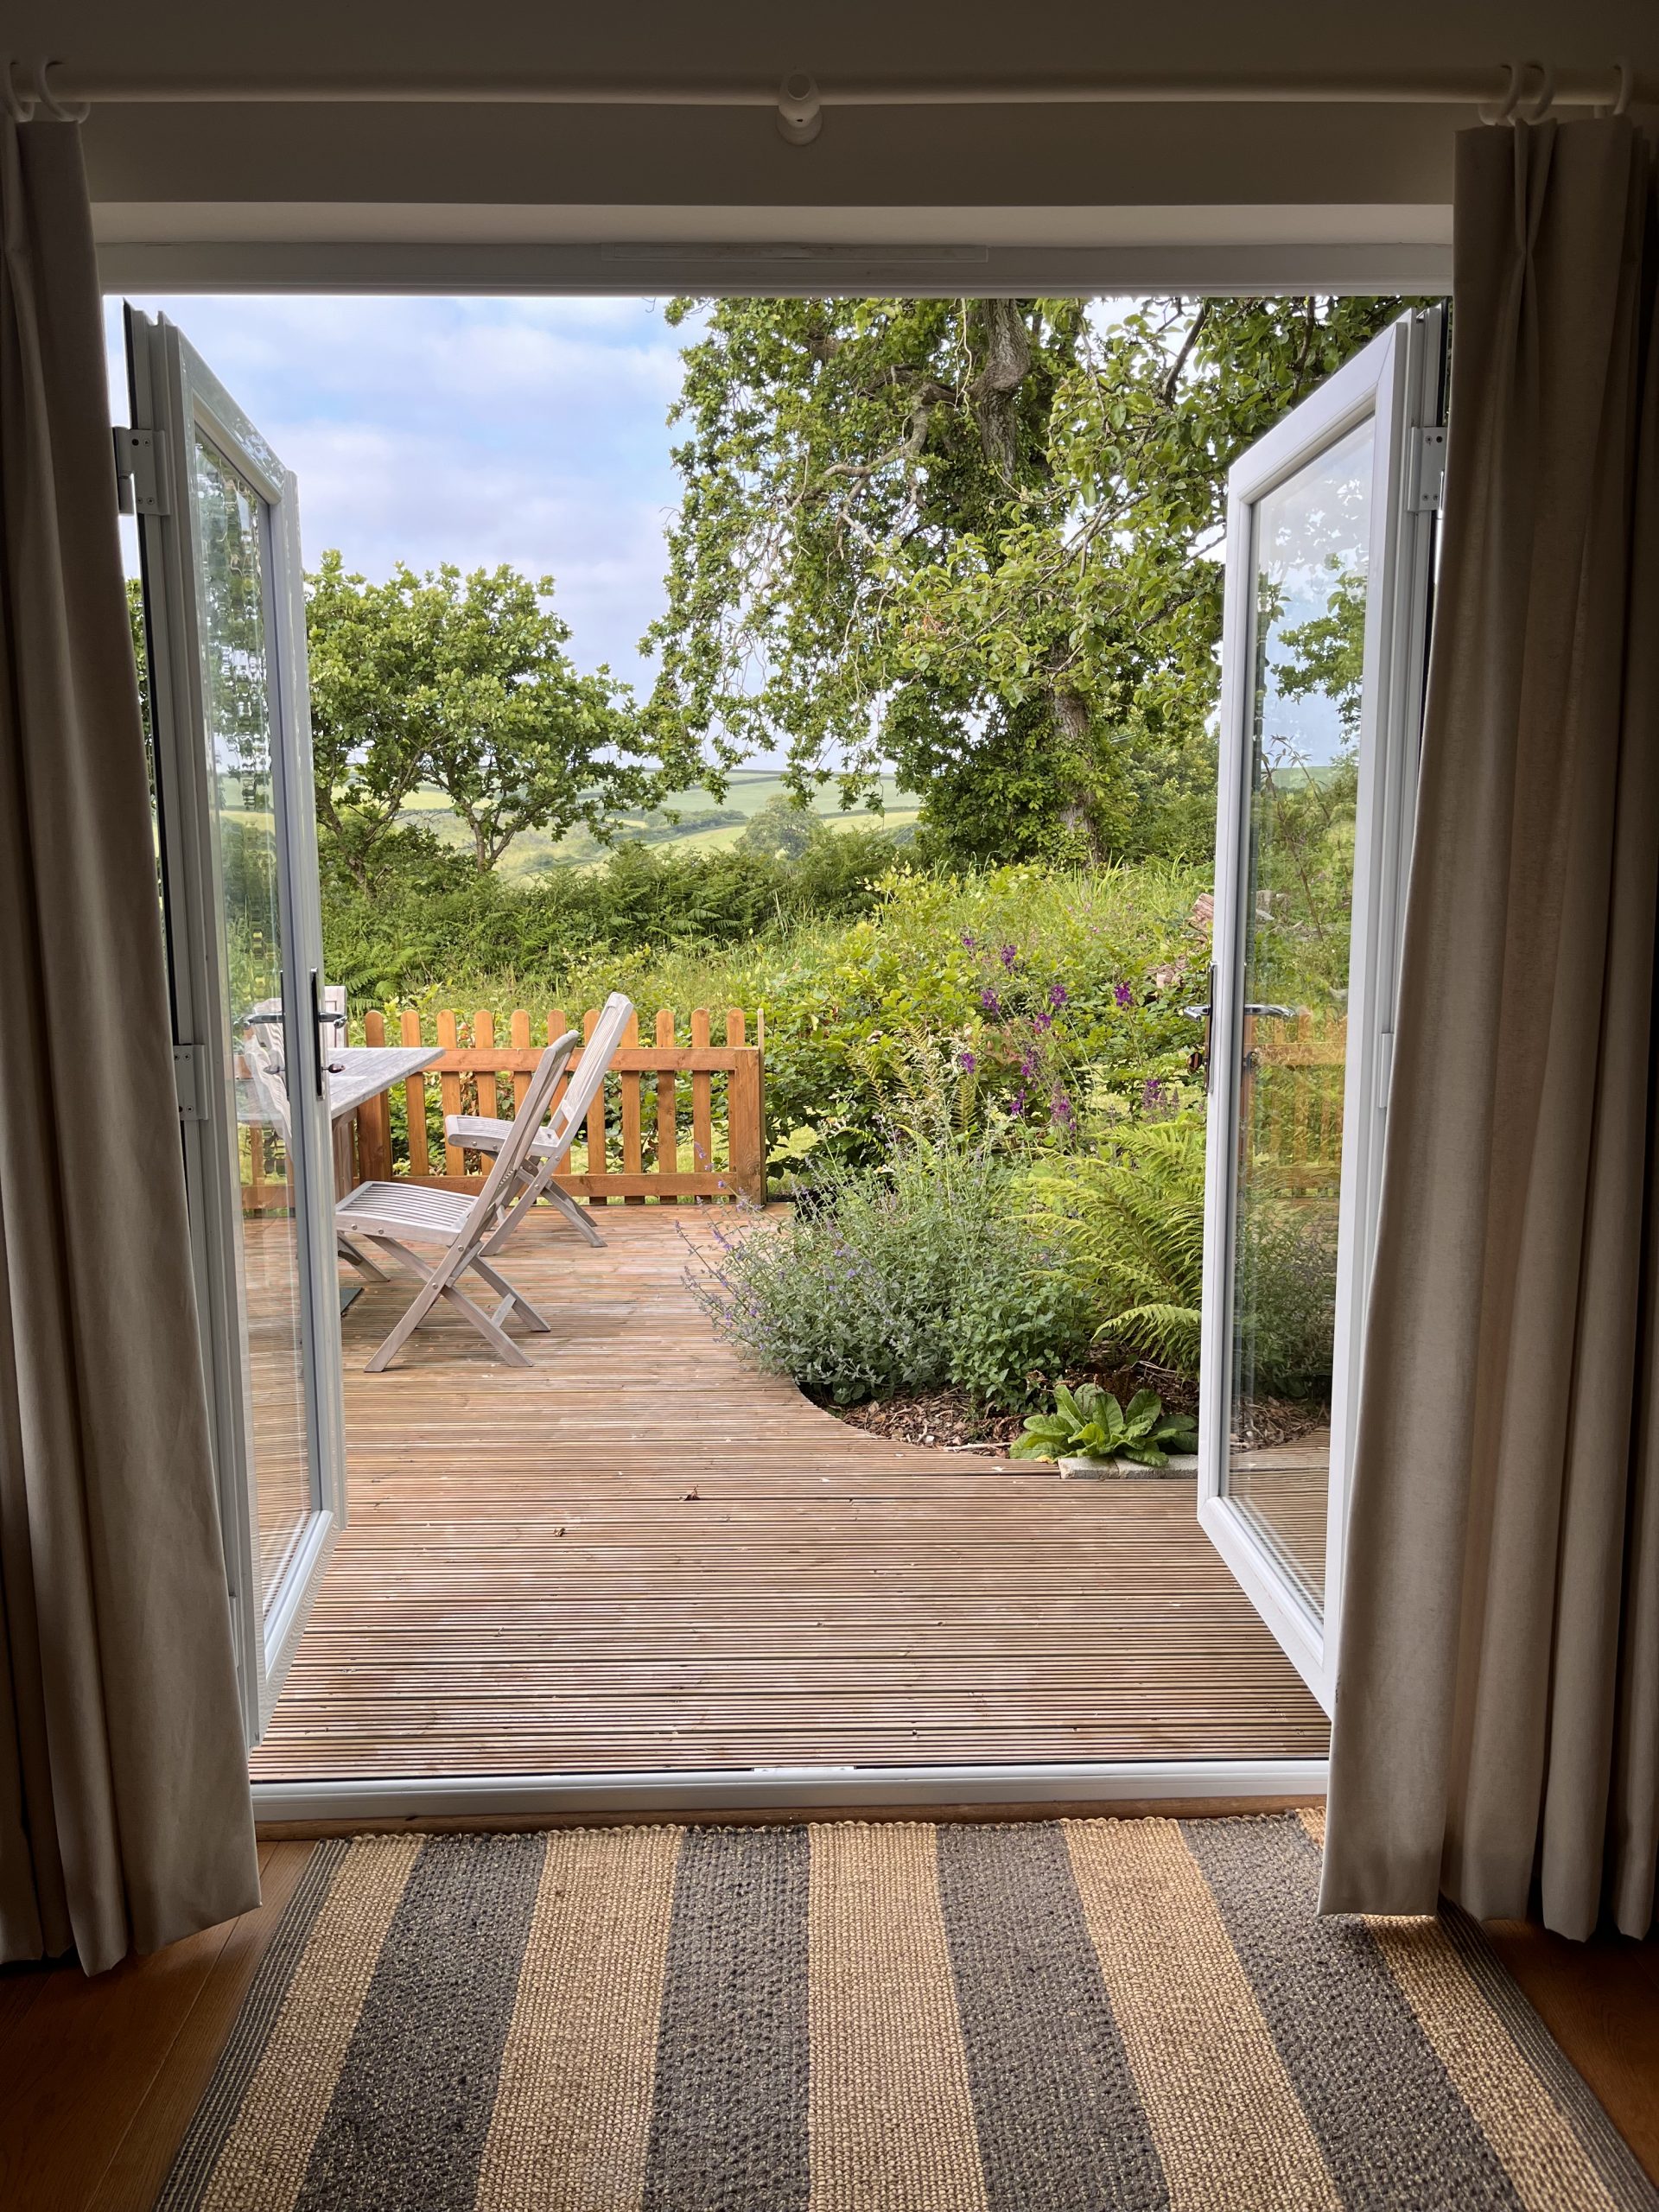 Inviting decking area at Bowden wood, our accommodation in Devon